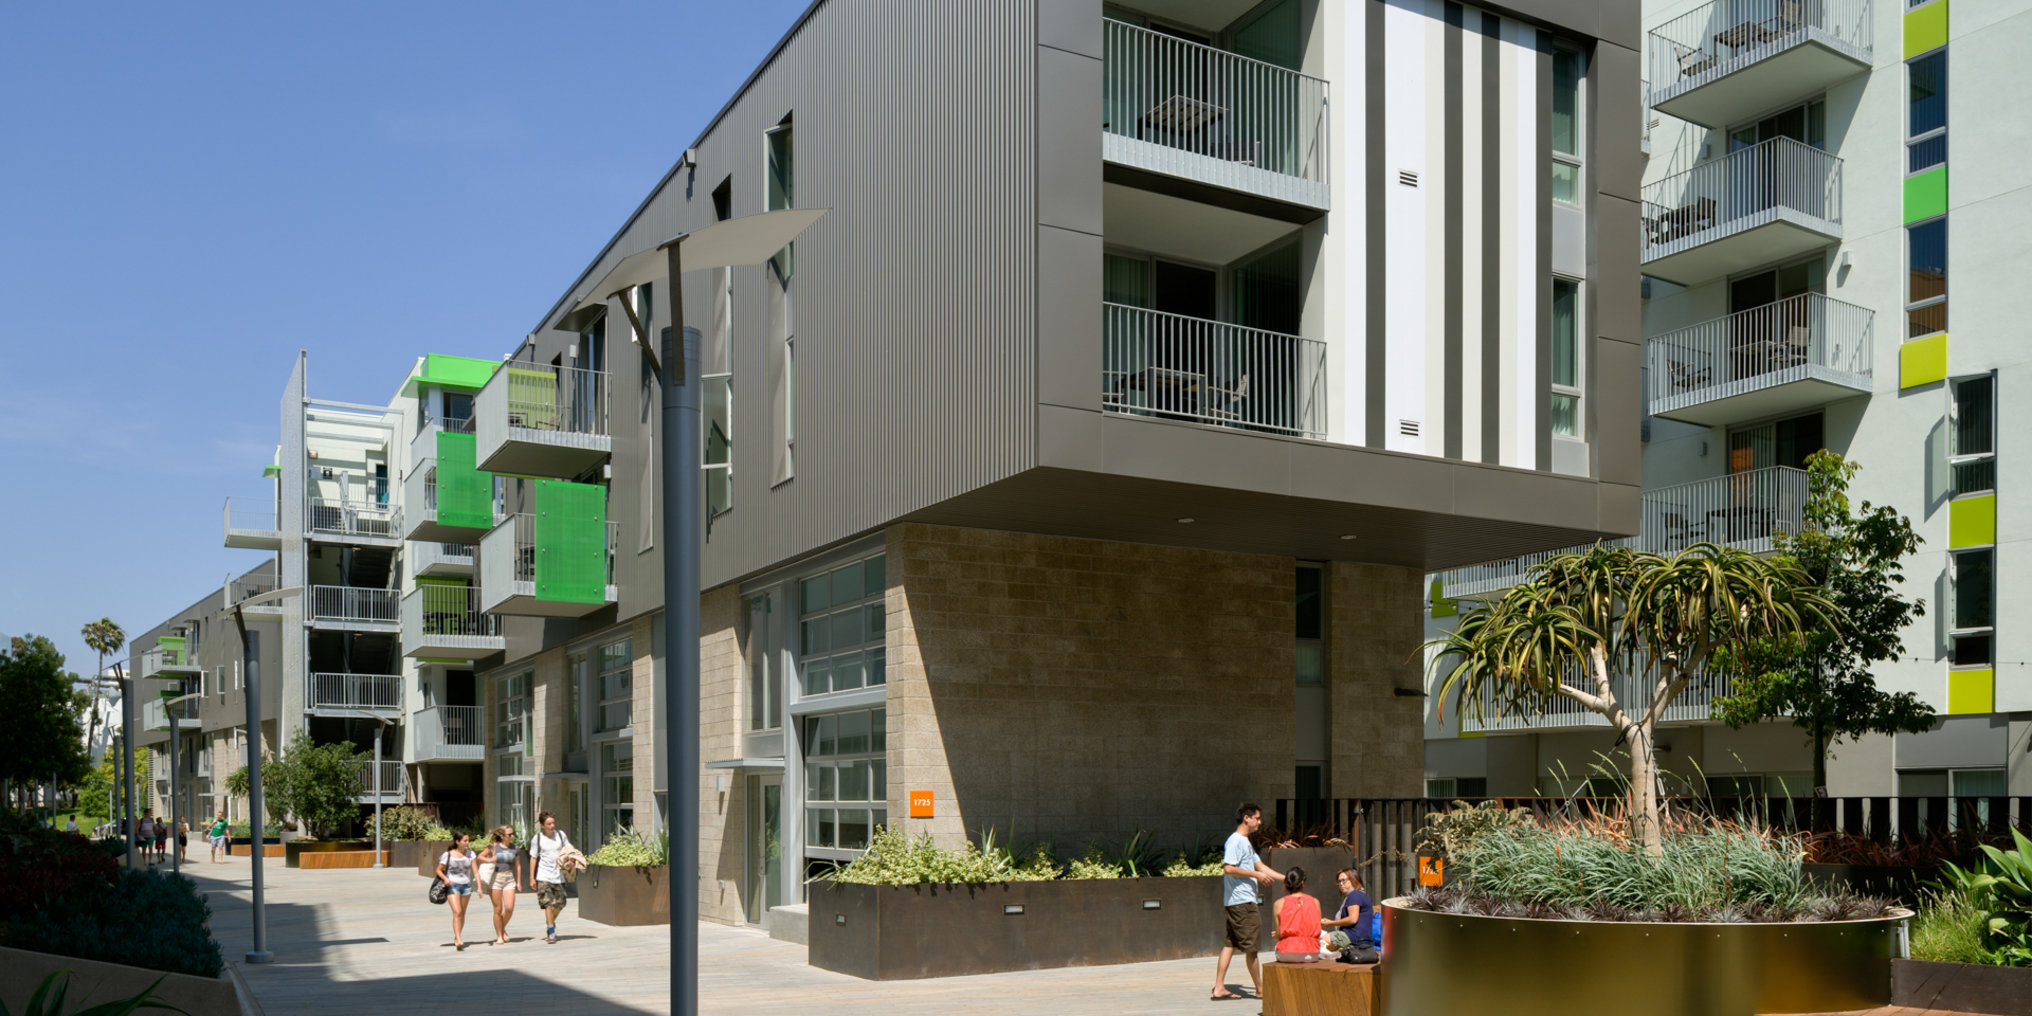  New Affordable Housing Opens in Santa Monica